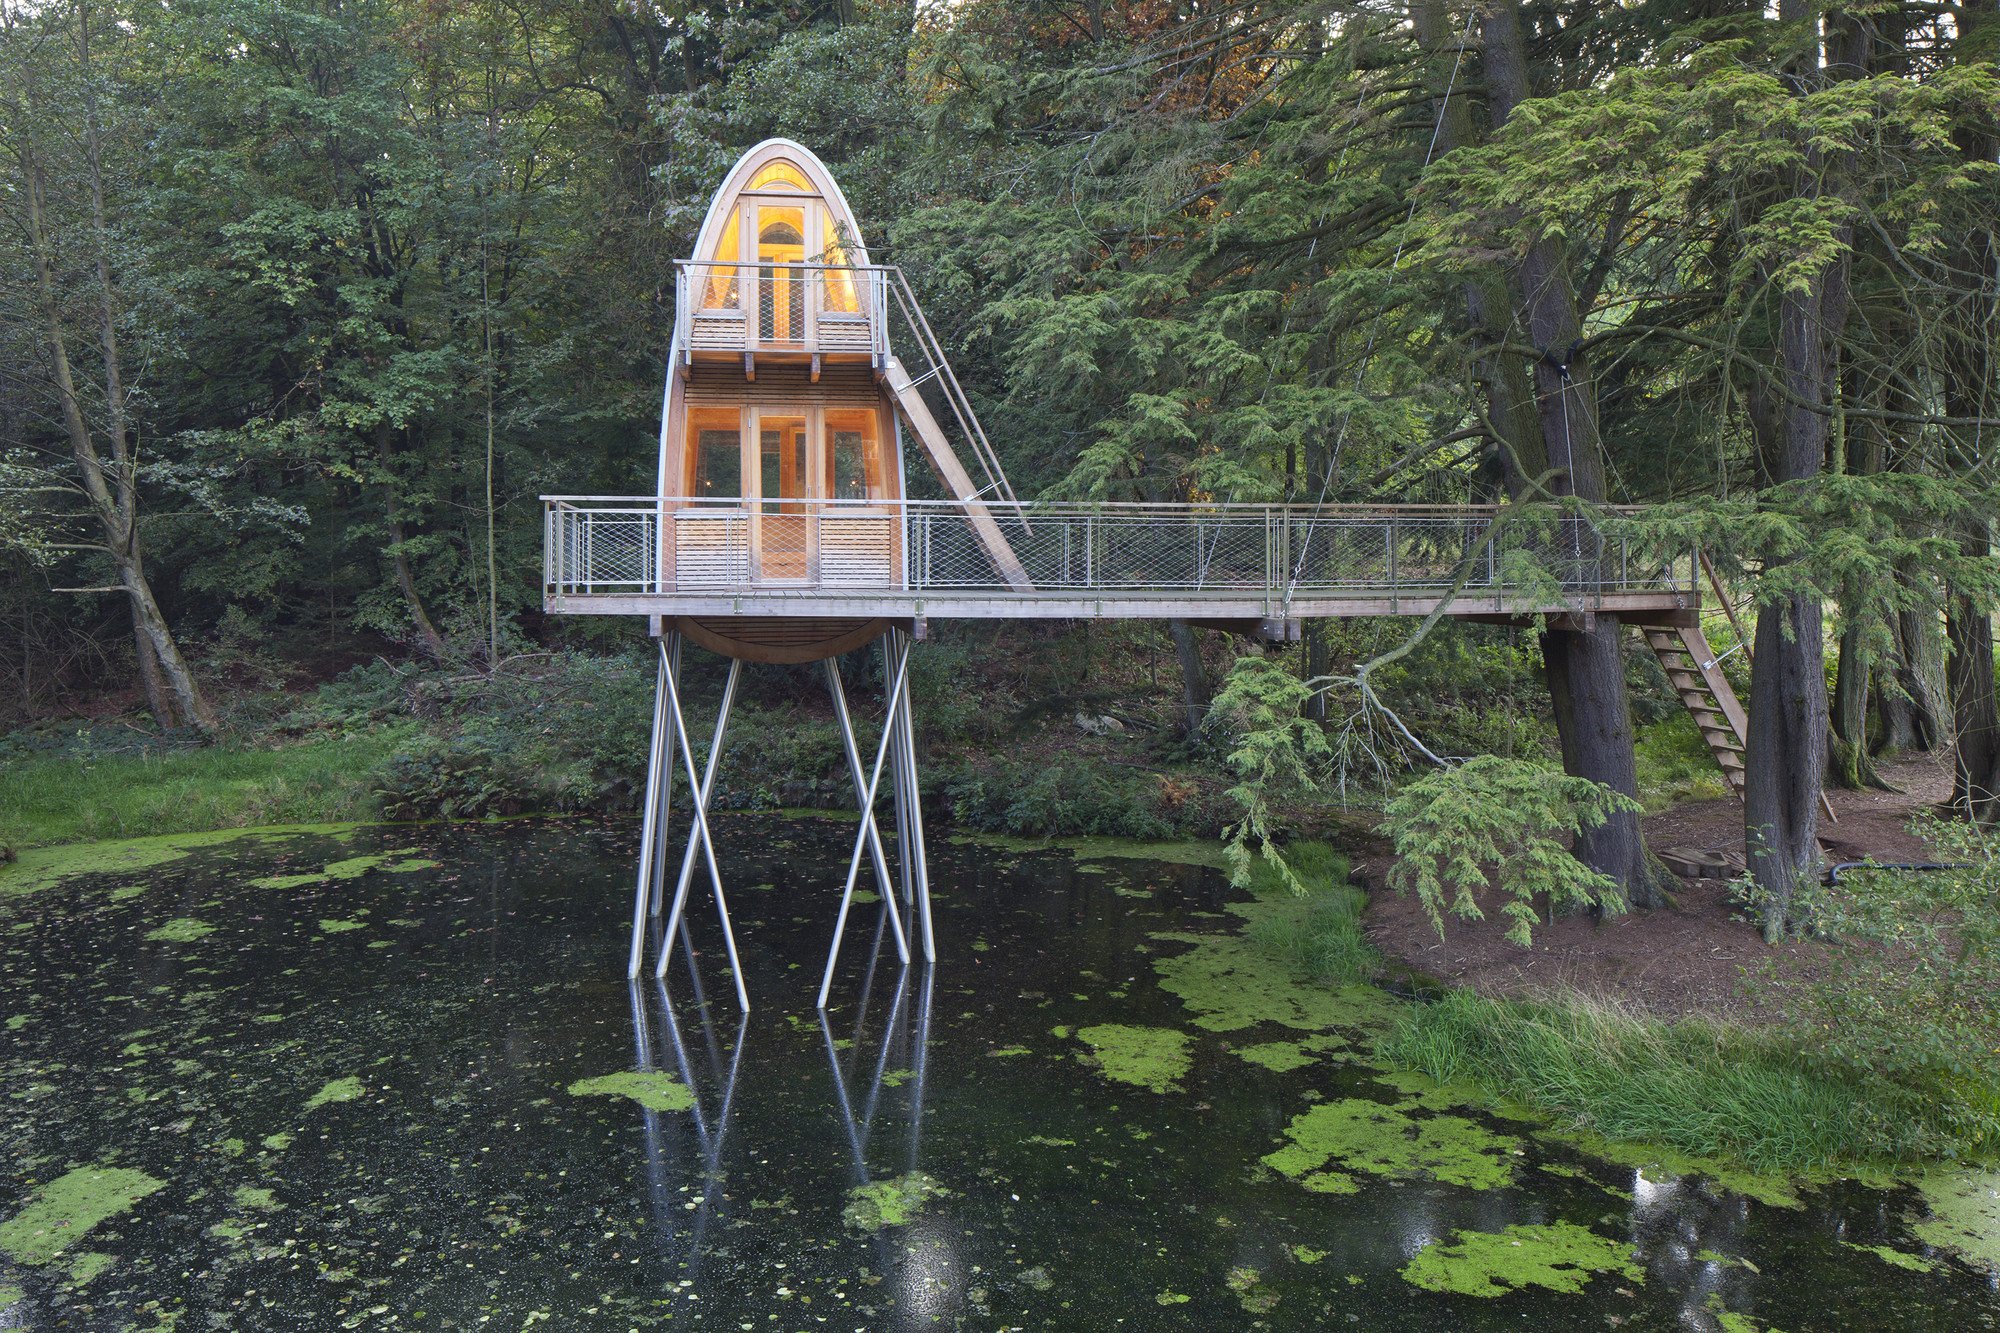 Treehouse Solling / baumraum